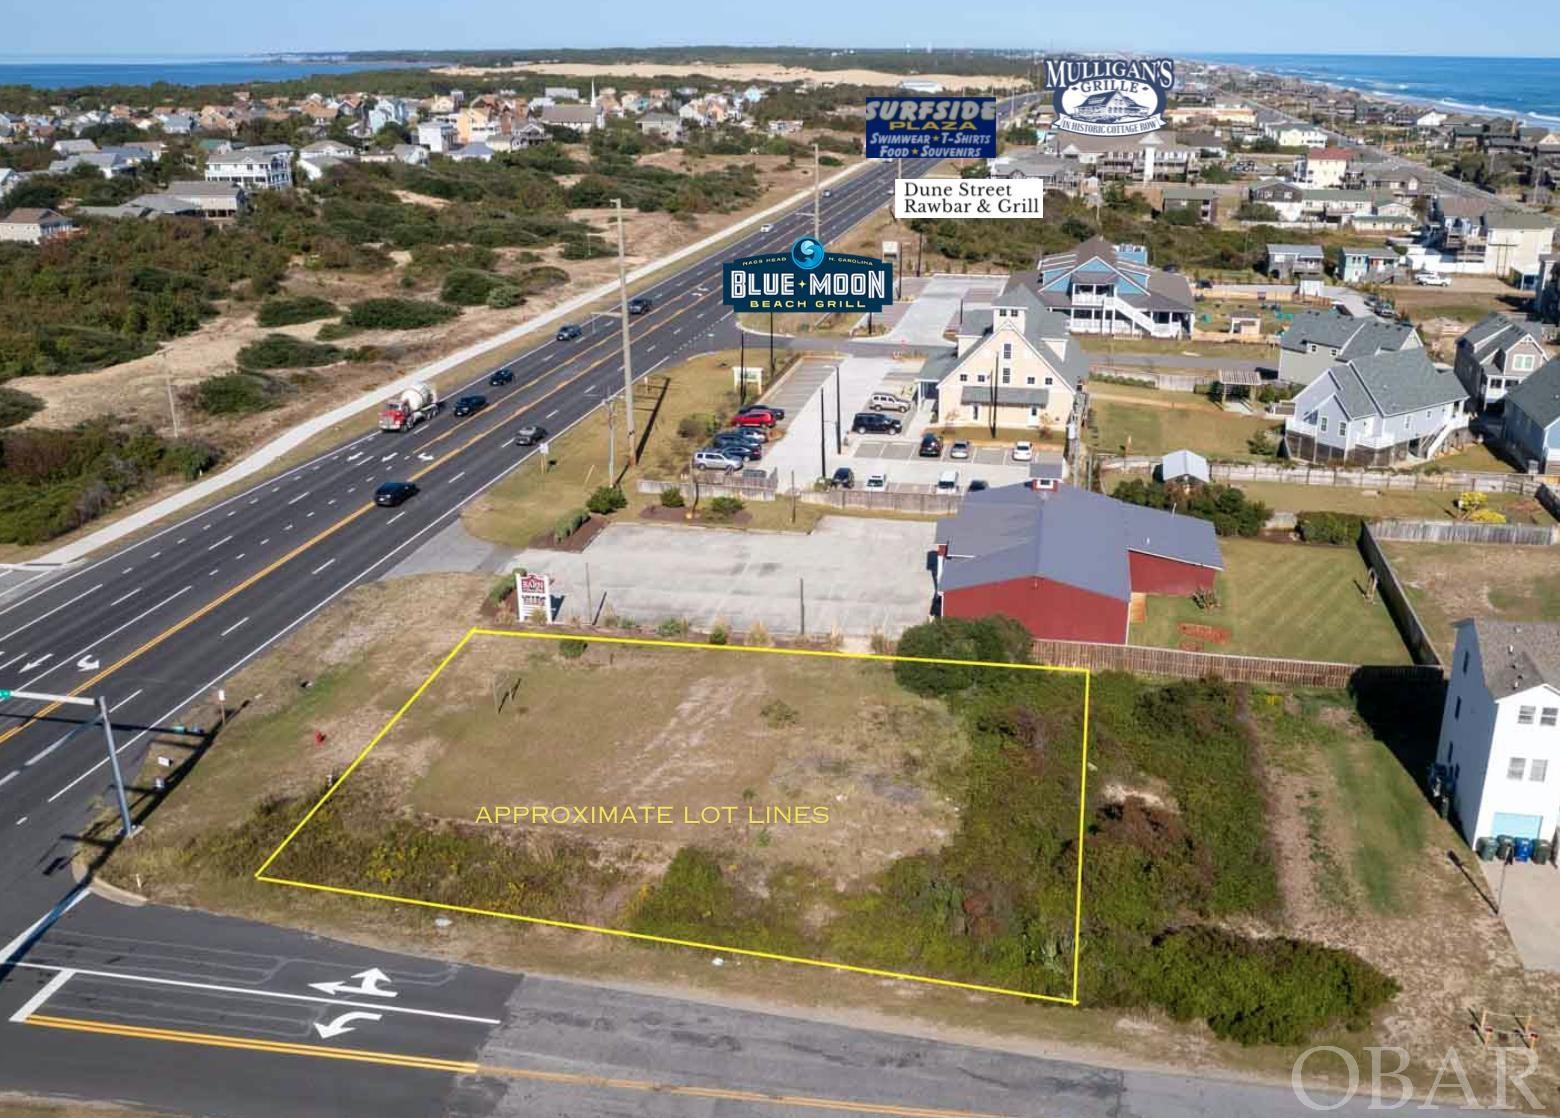 When you look at Real Estate you look at the location.  This corner location just south of Jockey's Ridge, the new Blue Moon, the even site Haven on the Beach.  Just north of the Outer Banks Hospital and the Outer Banks Mall. Surrounded by year round residence this site could support many of the allowed uses.  Owner has done the hard part with one mixed use idea.  Building concept would contain 4 residential condos and two Comercial condos.  Many more uses allowed.